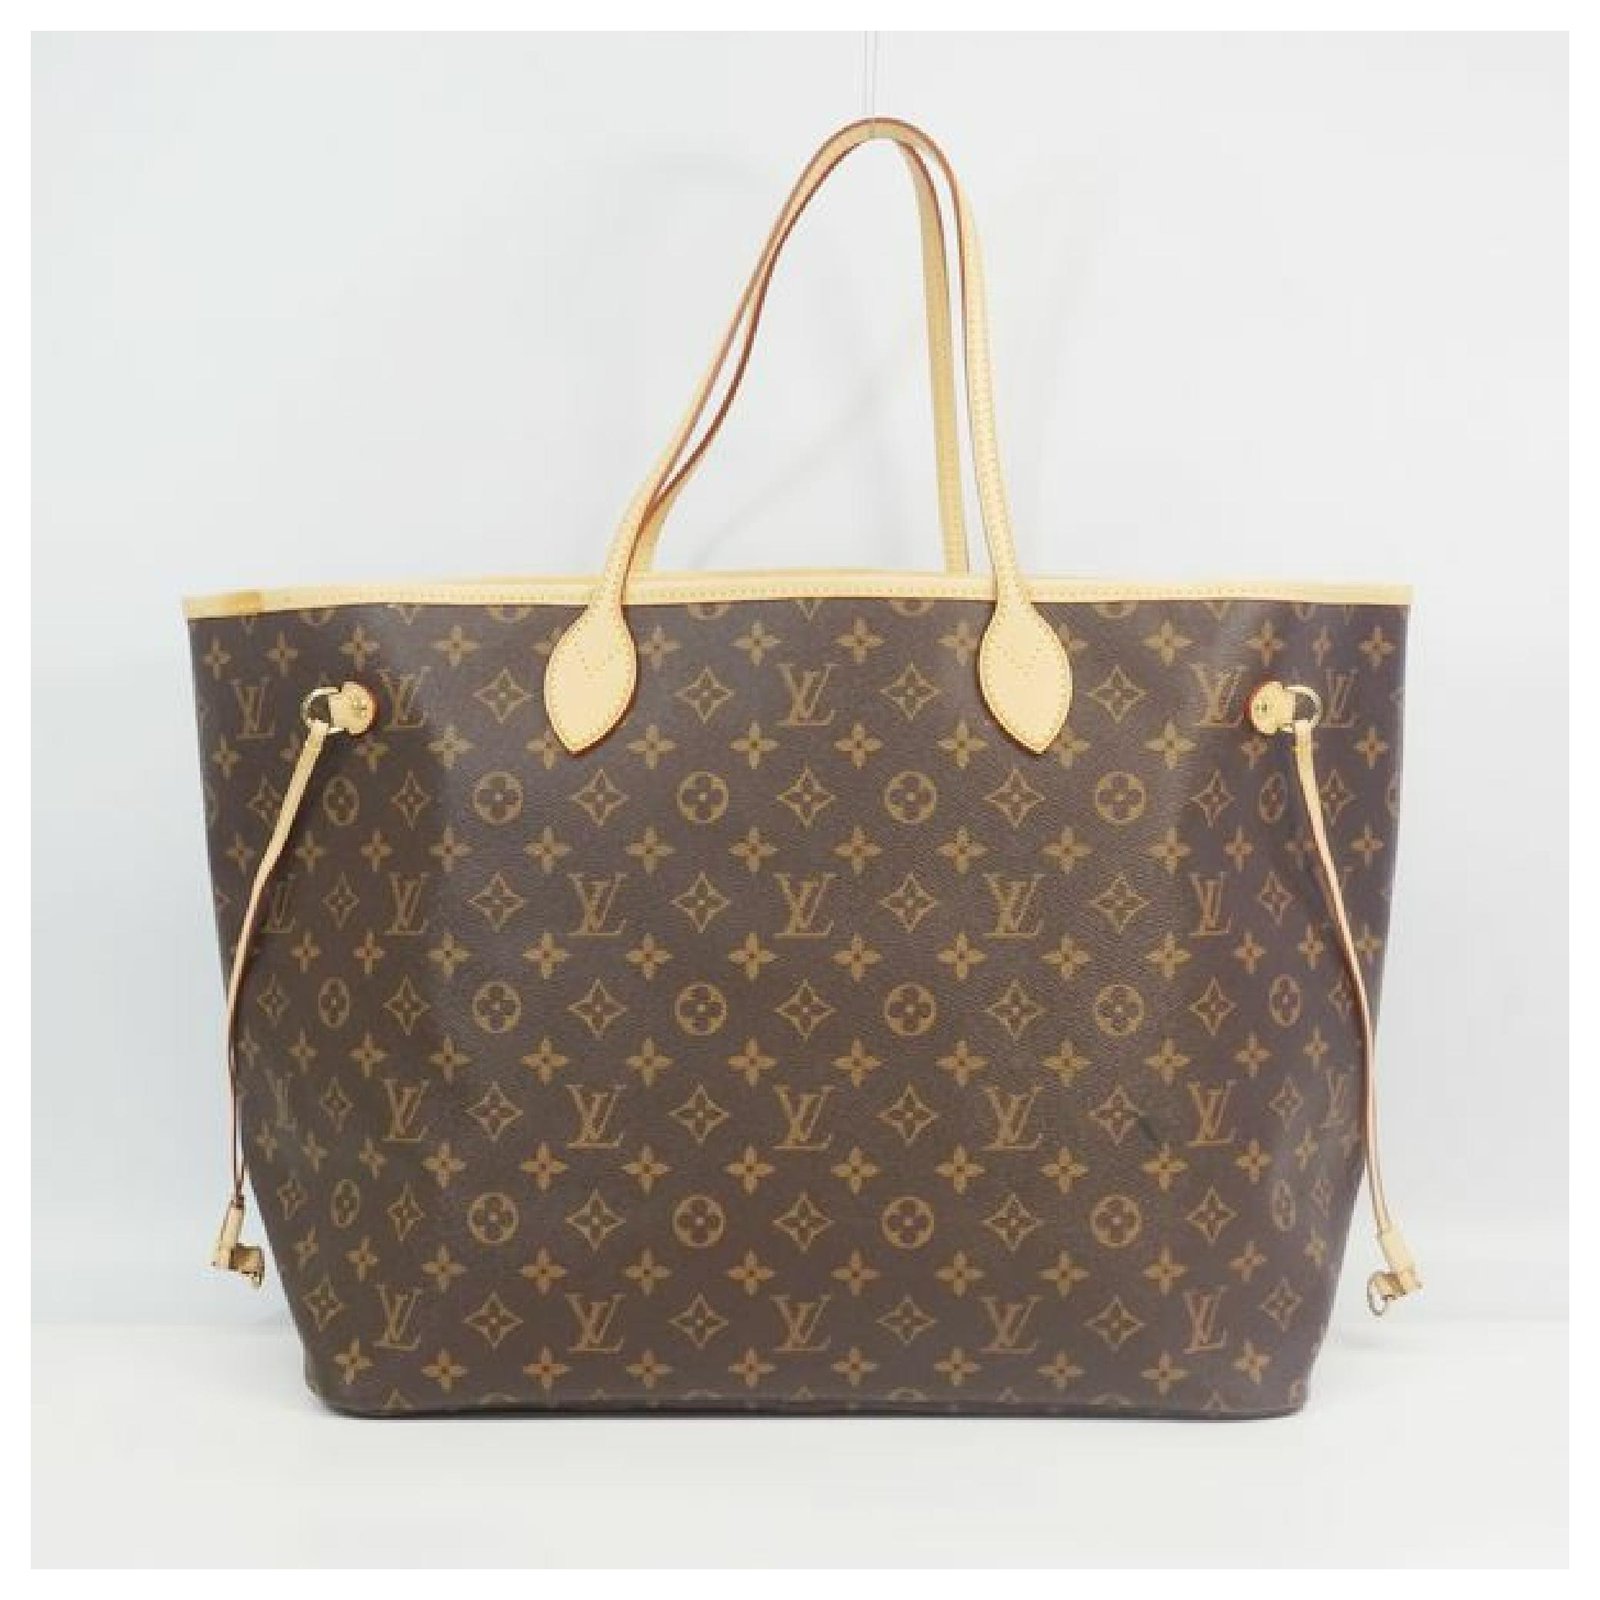 Authentic Louis Vuitton Monogram Neverfull GM Tote Bag Hand Bag M40157 Used  F/S